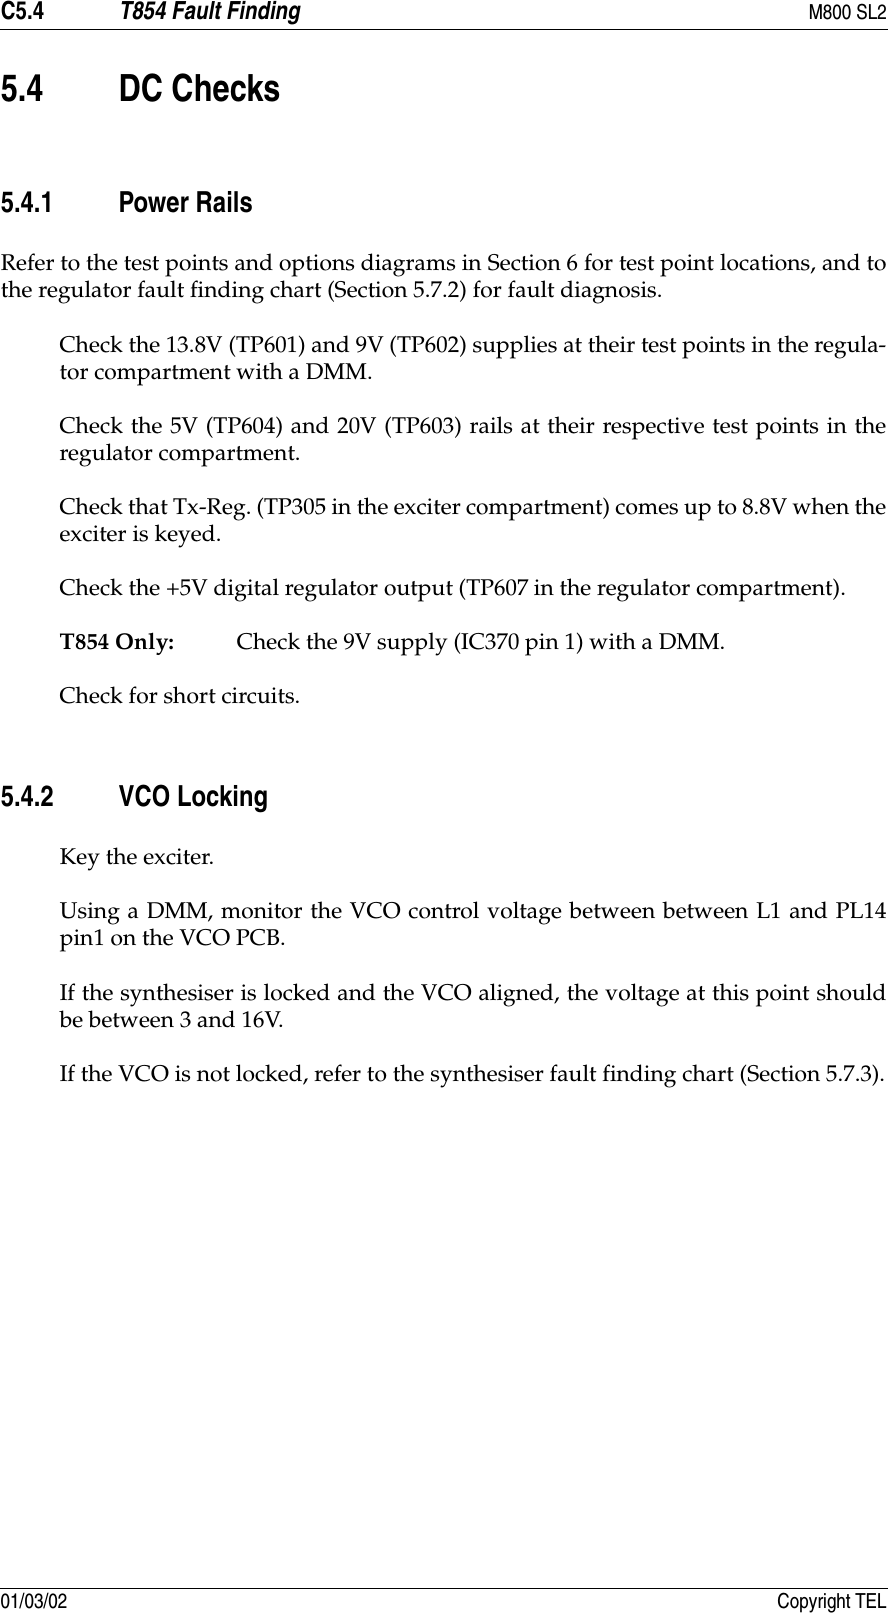 C5.4 T854 Fault Finding M800 SL201/03/02 Copyright TEL5.4 DC Checks5.4.1 Power RailsRefer to the test points and options diagrams in Section 6 for test point locations, and tothe regulator fault finding chart (Section 5.7.2) for fault diagnosis.Check the 13.8V (TP601) and 9V (TP602) supplies at their test points in the regula-tor compartment with a DMM.Check the 5V (TP604) and 20V (TP603) rails at their respective test points in theregulator compartment.Check that Tx-Reg. (TP305 in the exciter compartment) comes up to 8.8V when theexciter is keyed.Check the +5V digital regulator output (TP607 in the regulator compartment).T854 Only: Check the 9V supply (IC370 pin 1) with a DMM.Check for short circuits.5.4.2 VCO LockingKey the exciter.Using a DMM, monitor the VCO control voltage between between L1 and PL14pin1 on the VCO PCB.If the synthesiser is locked and the VCO aligned, the voltage at this point shouldbe between 3 and 16V.If the VCO is not locked, refer to the synthesiser fault finding chart (Section 5.7.3).